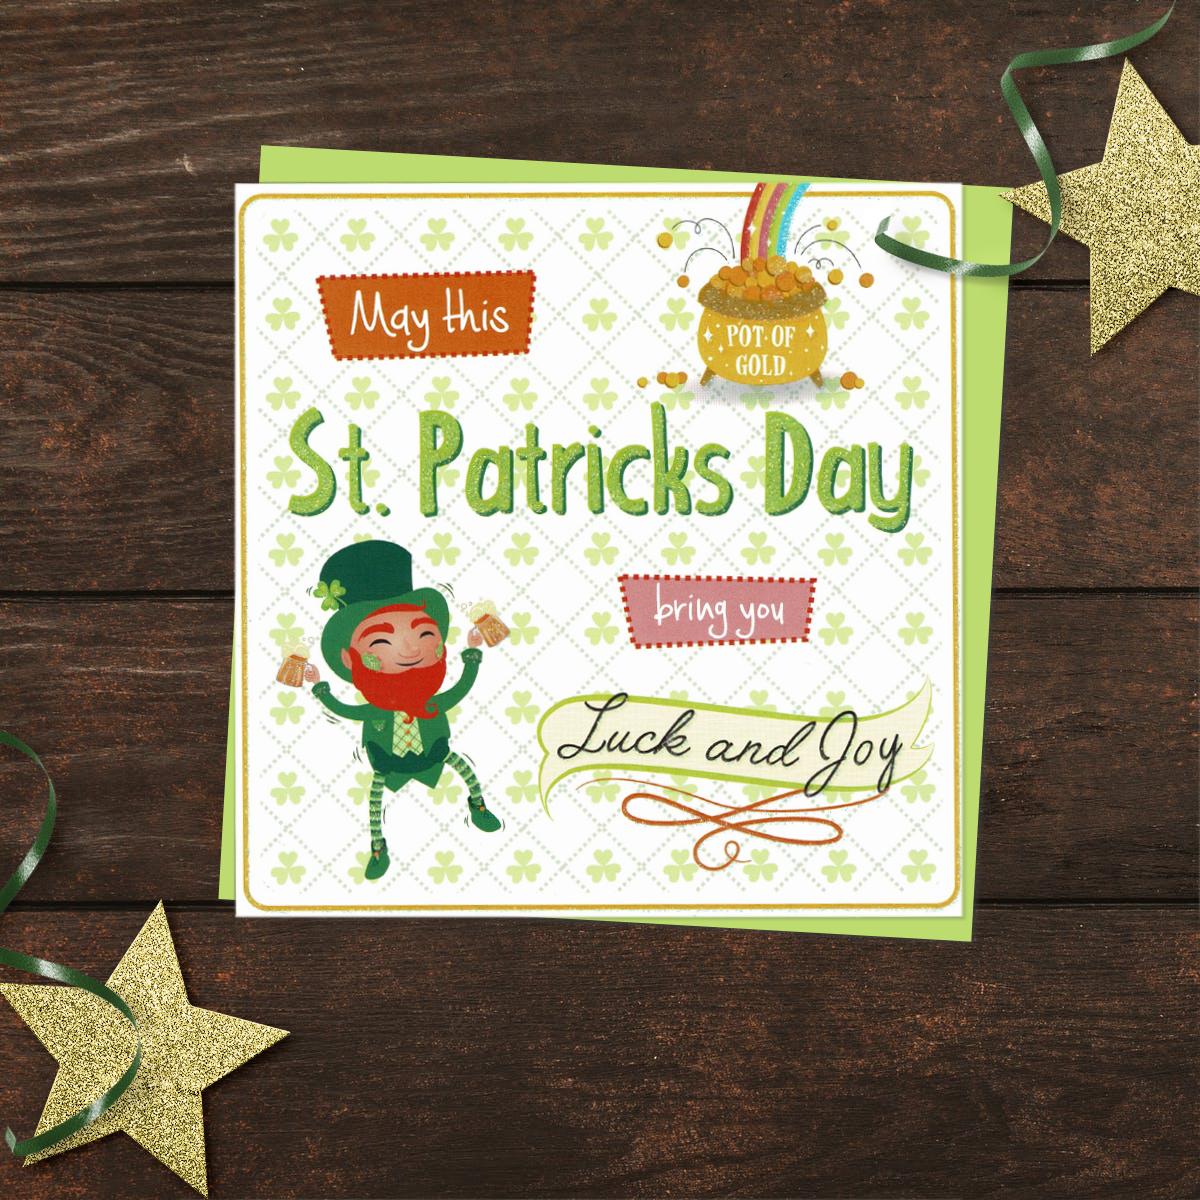 ' May This St. Patrick's Day Bring You Luck And Joy' Card Showing a Leprechaun And A Pot Of Gold! With Lime Green Envelope